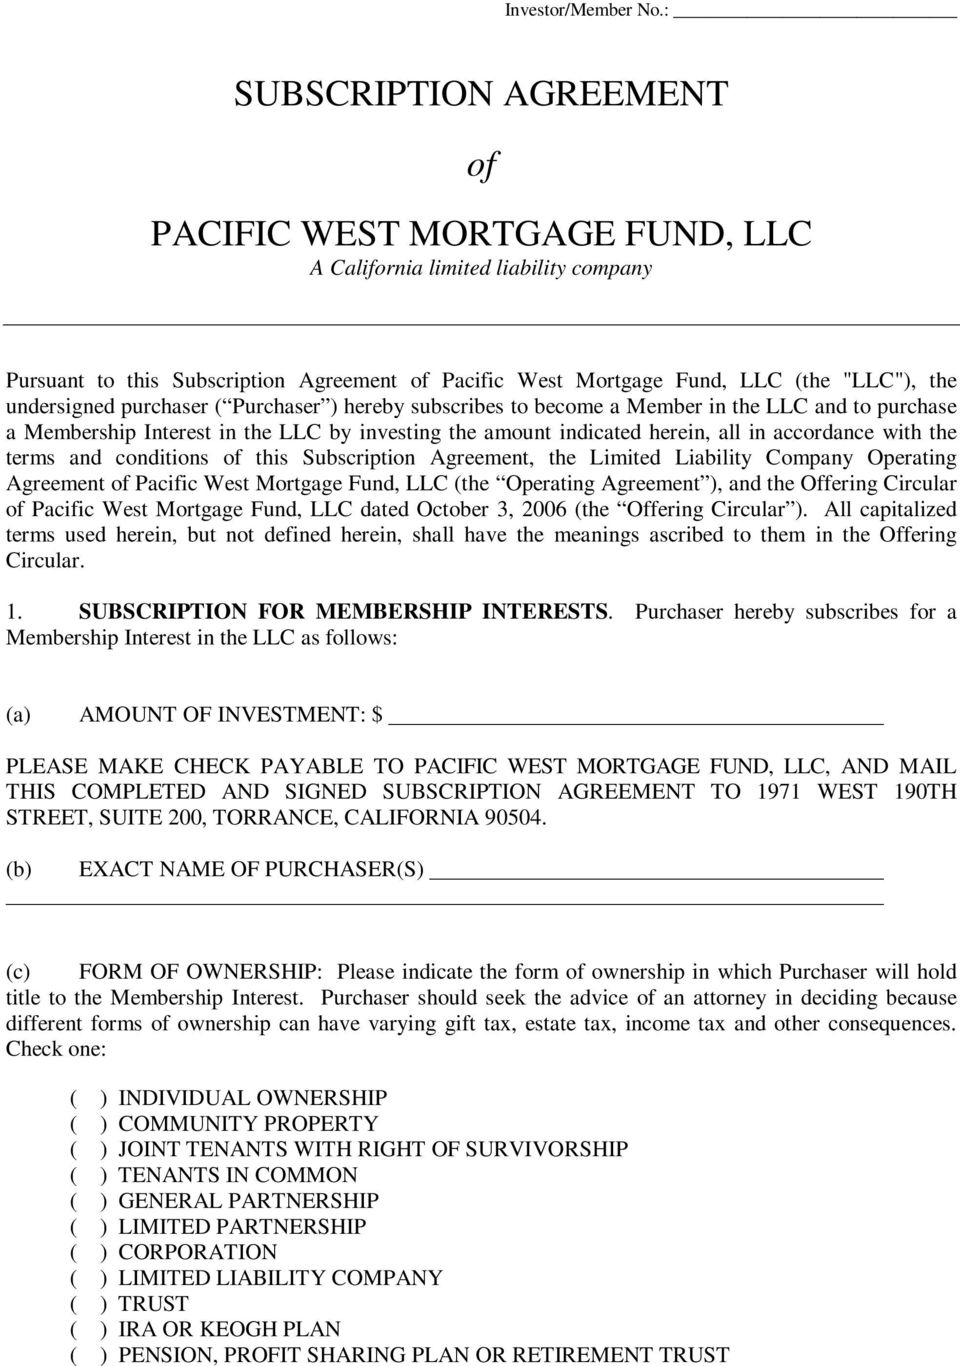 Subscription Agreement Llc Subscription Agreement Of Pacific West Mortgage Fund Llc A